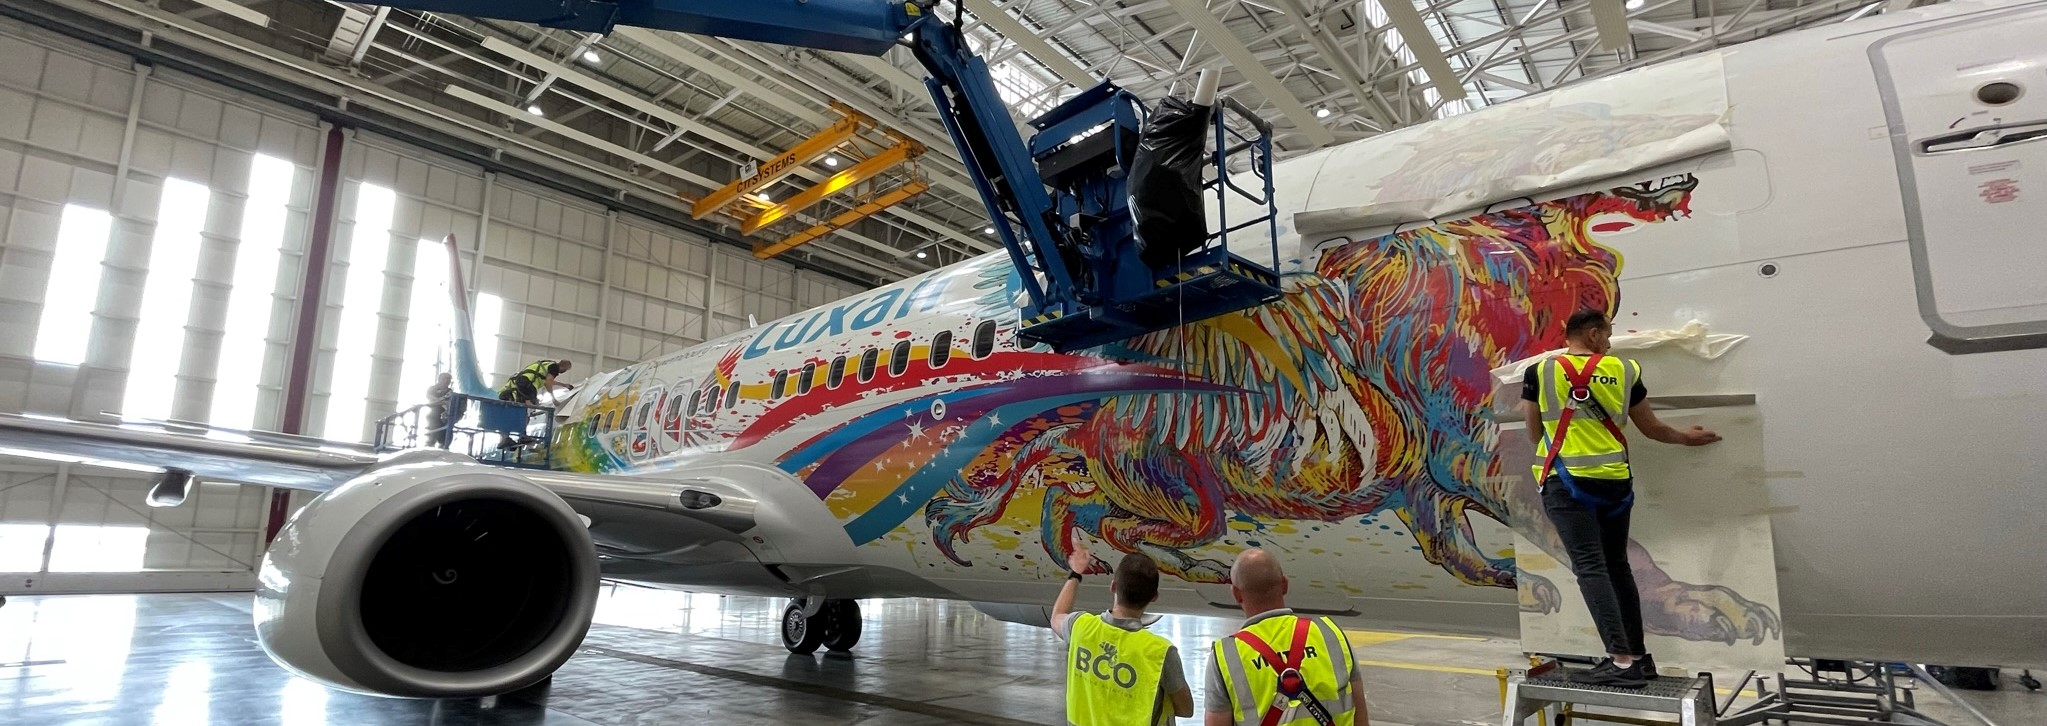 Illustration for: Luxair reveals another artistic livery with BCO decals (Flying is an Art – Luxair 60 years)